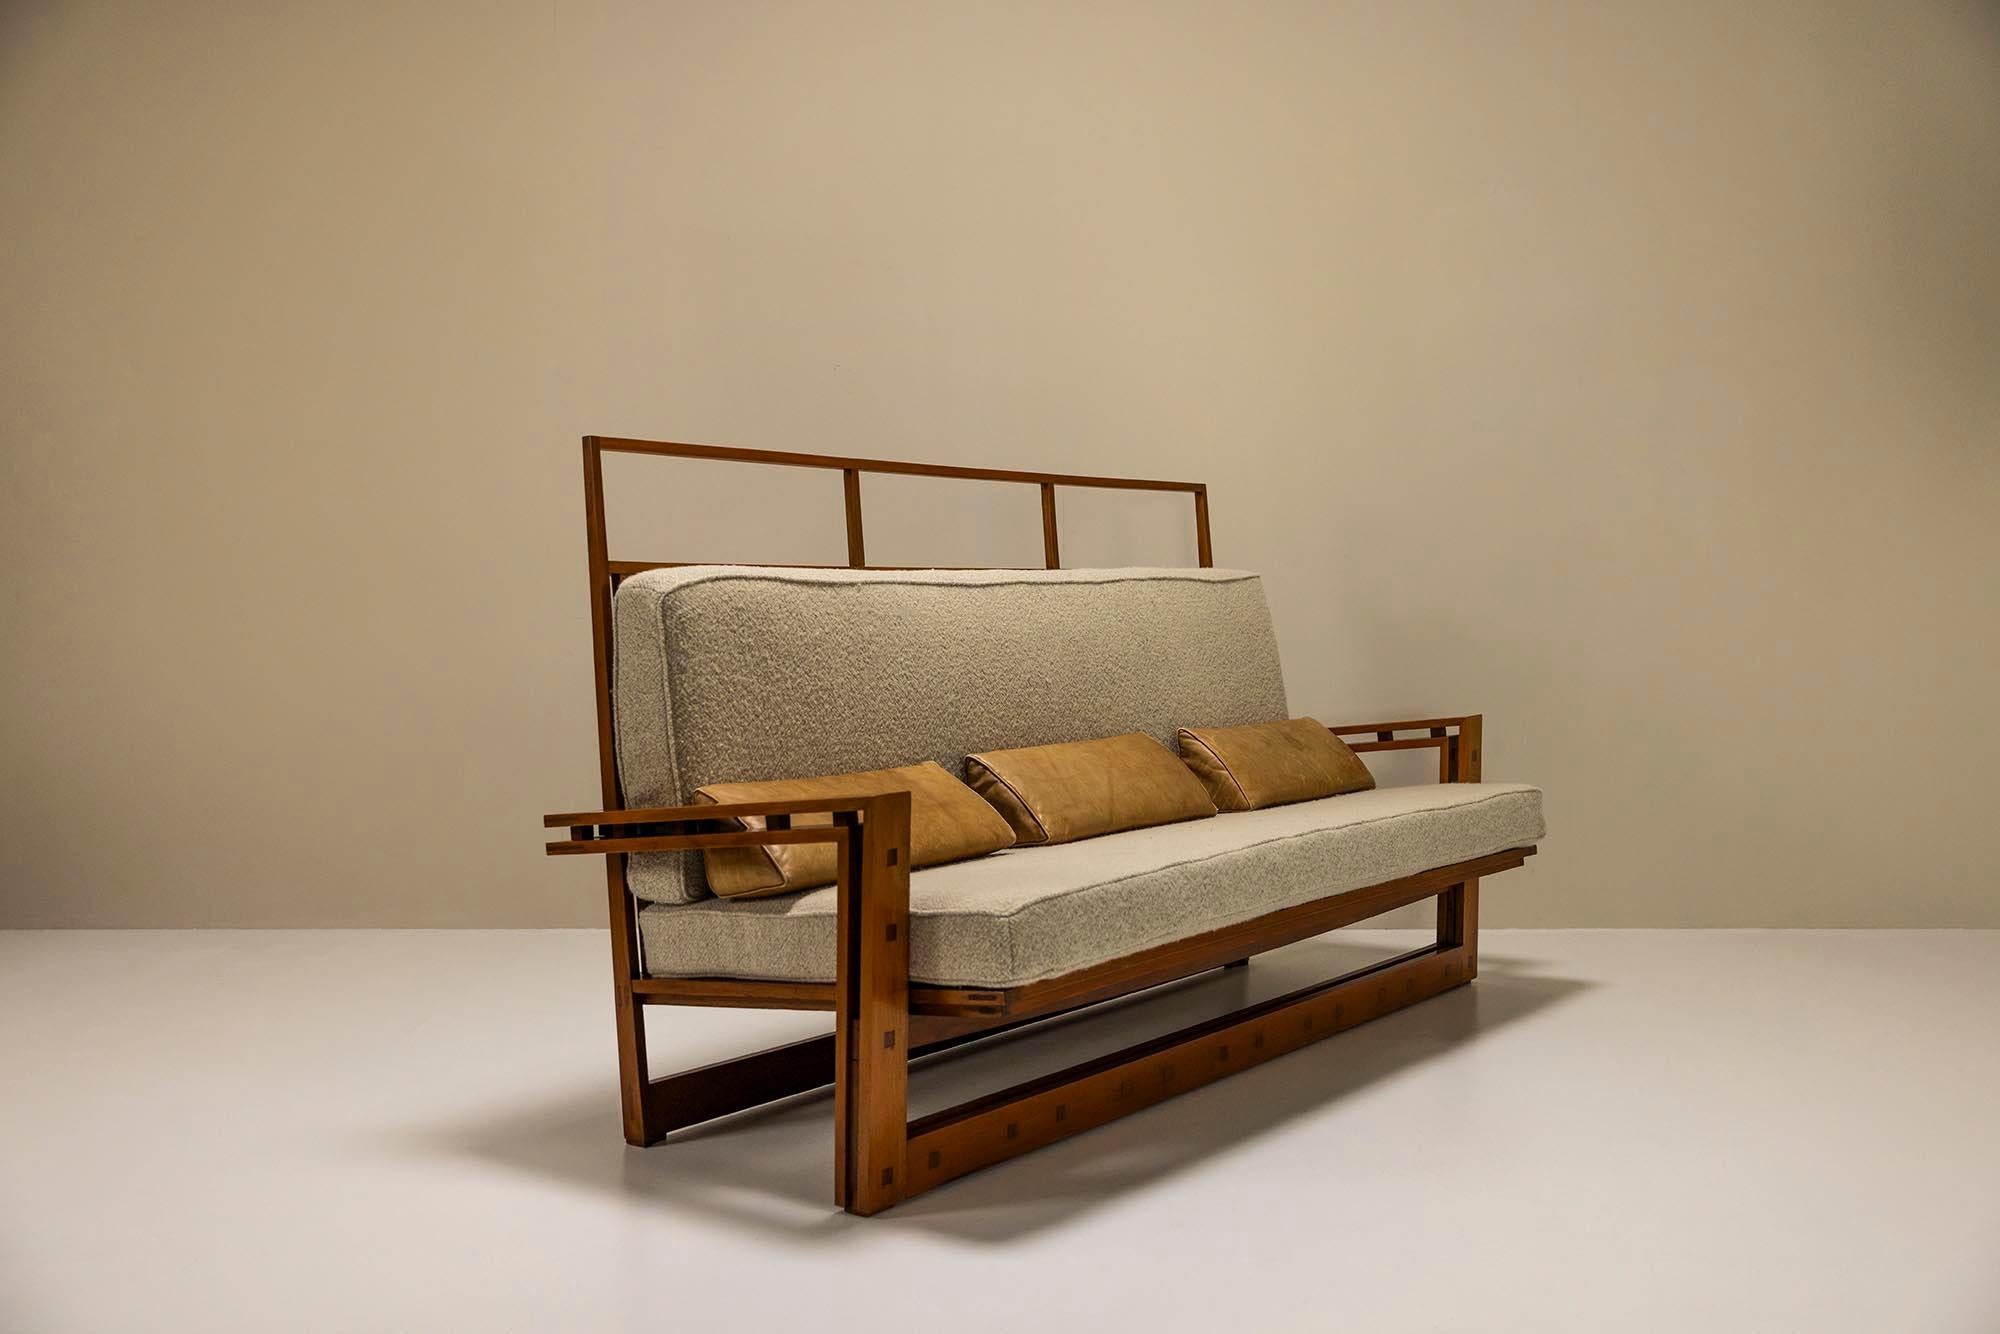 Three Seater Sofa In Solid Ash And Mansonia Wood By Fausto Bontempi, Italy 1961